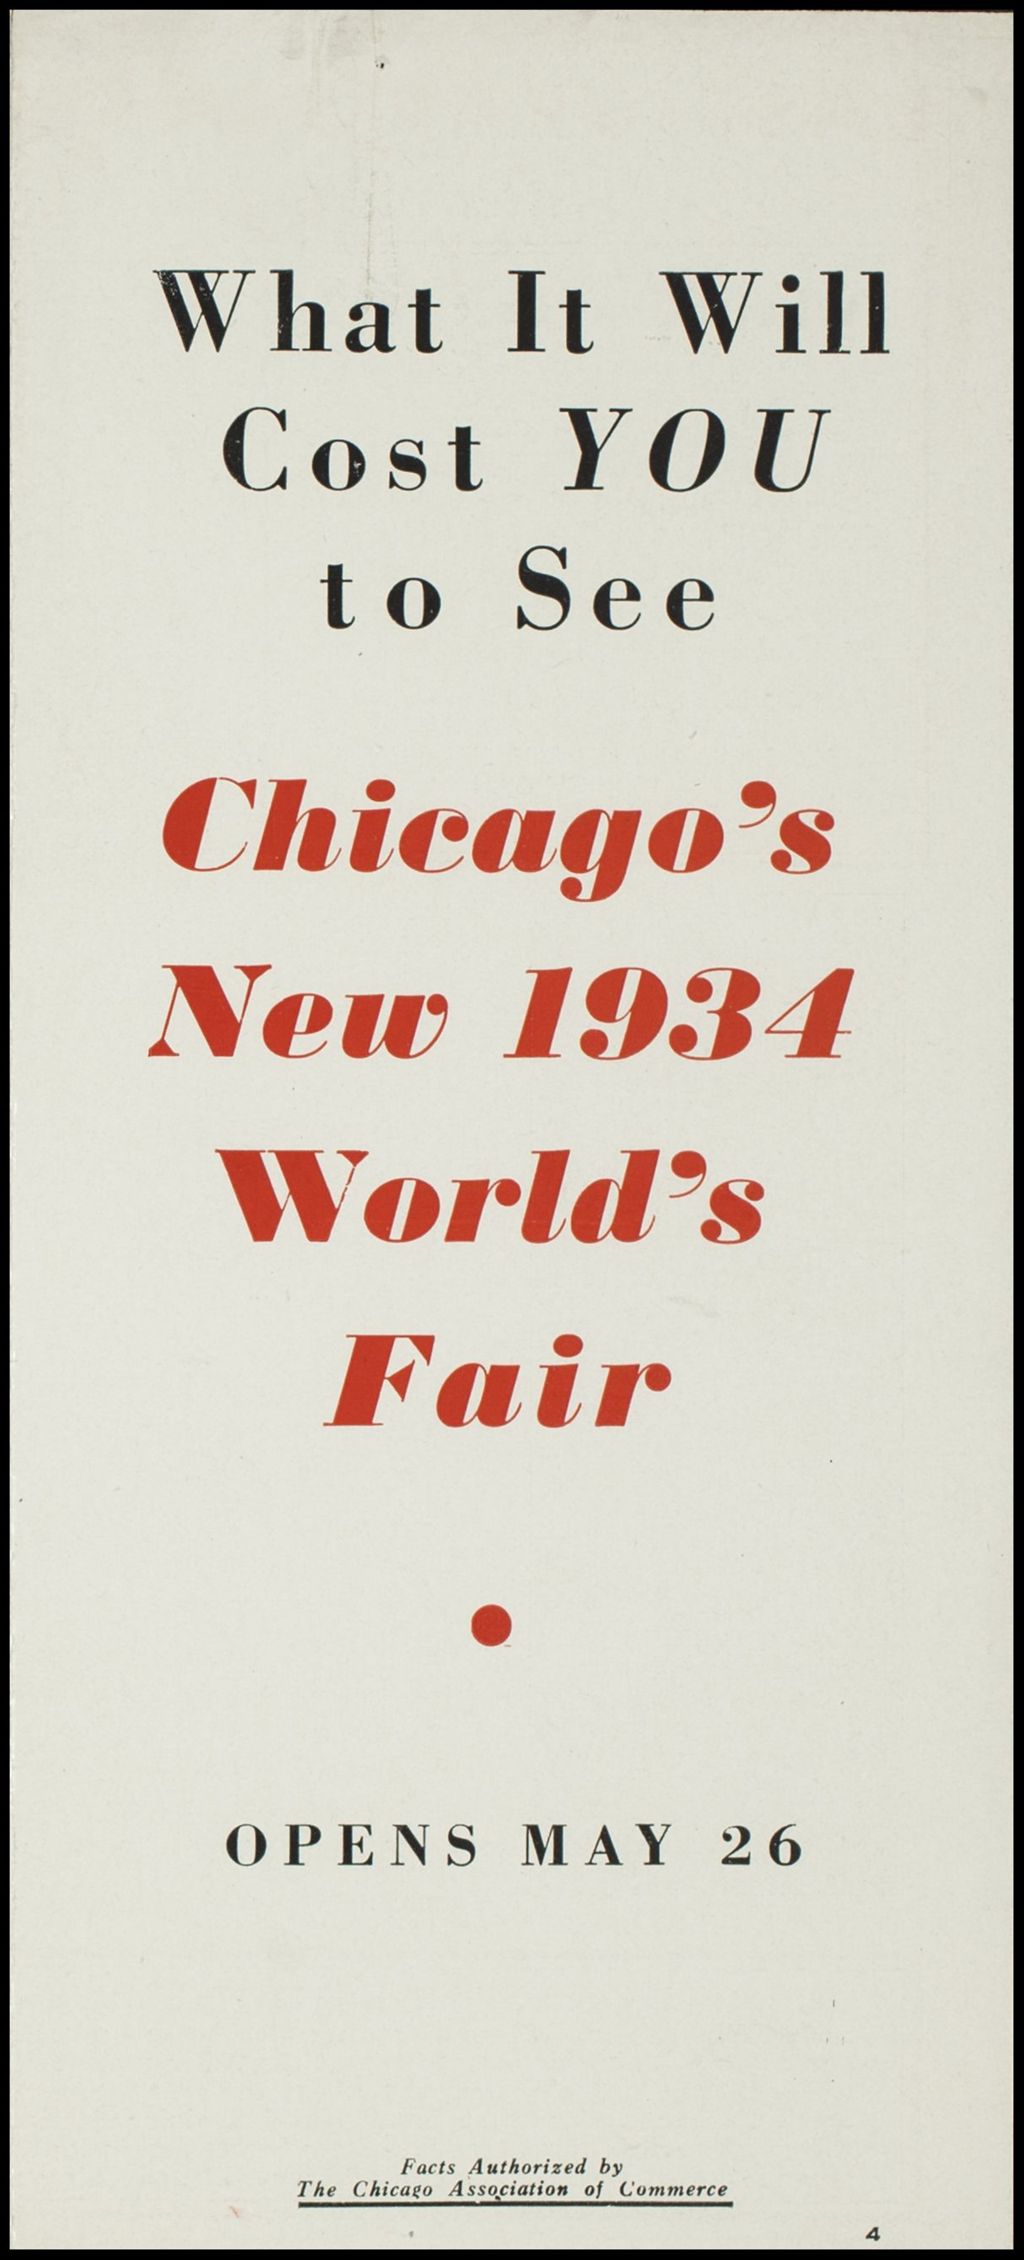 What It Will Cost You To See Chicago's New 1934 World's Fair (Folder 16-173)